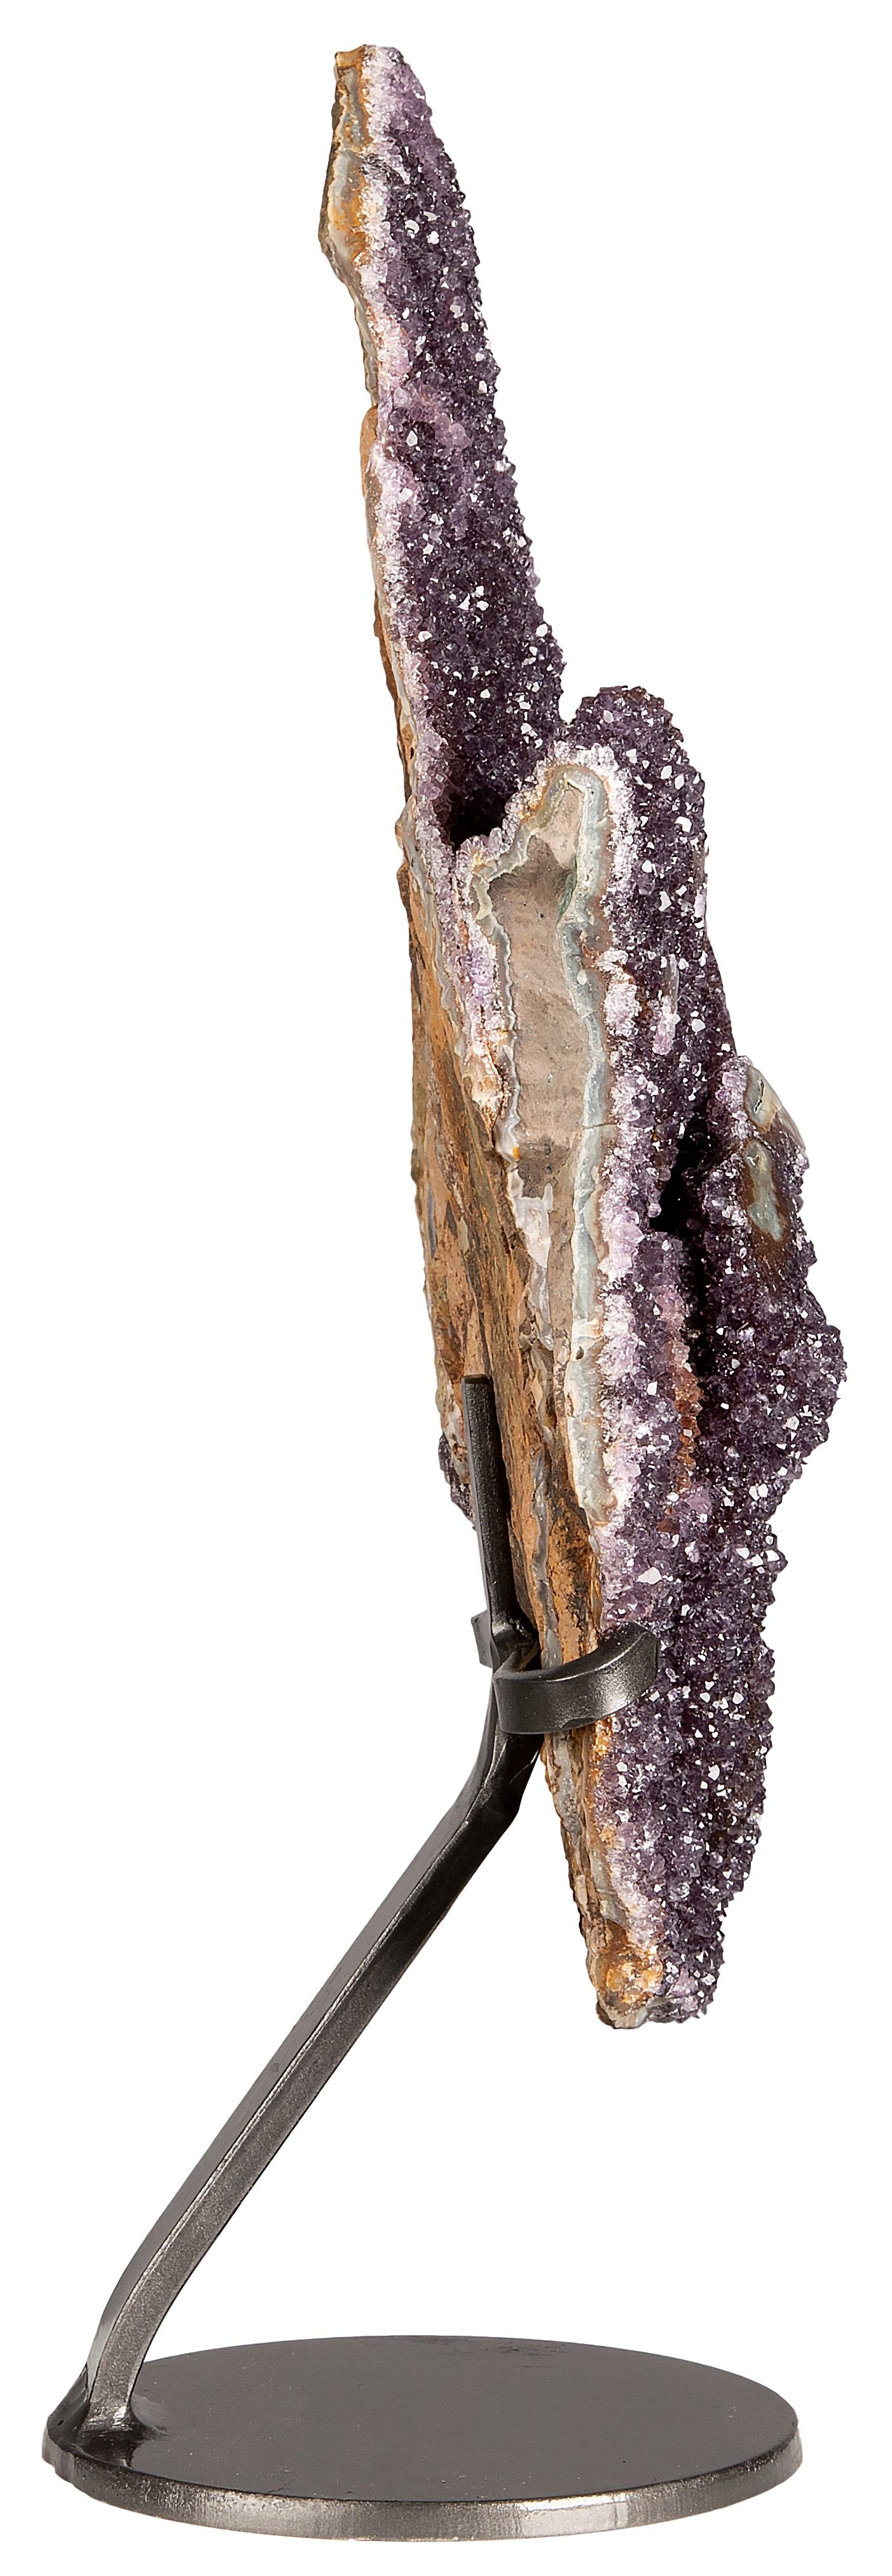 Exquisite deep purple beautifully shaped amethyst aesthetic cluster with stalactites formation. Colours fuse together in this uniquely beautiful piece, presenting the viewer with purple amethyst mixed with red-orange druze, creating a lovely colour.